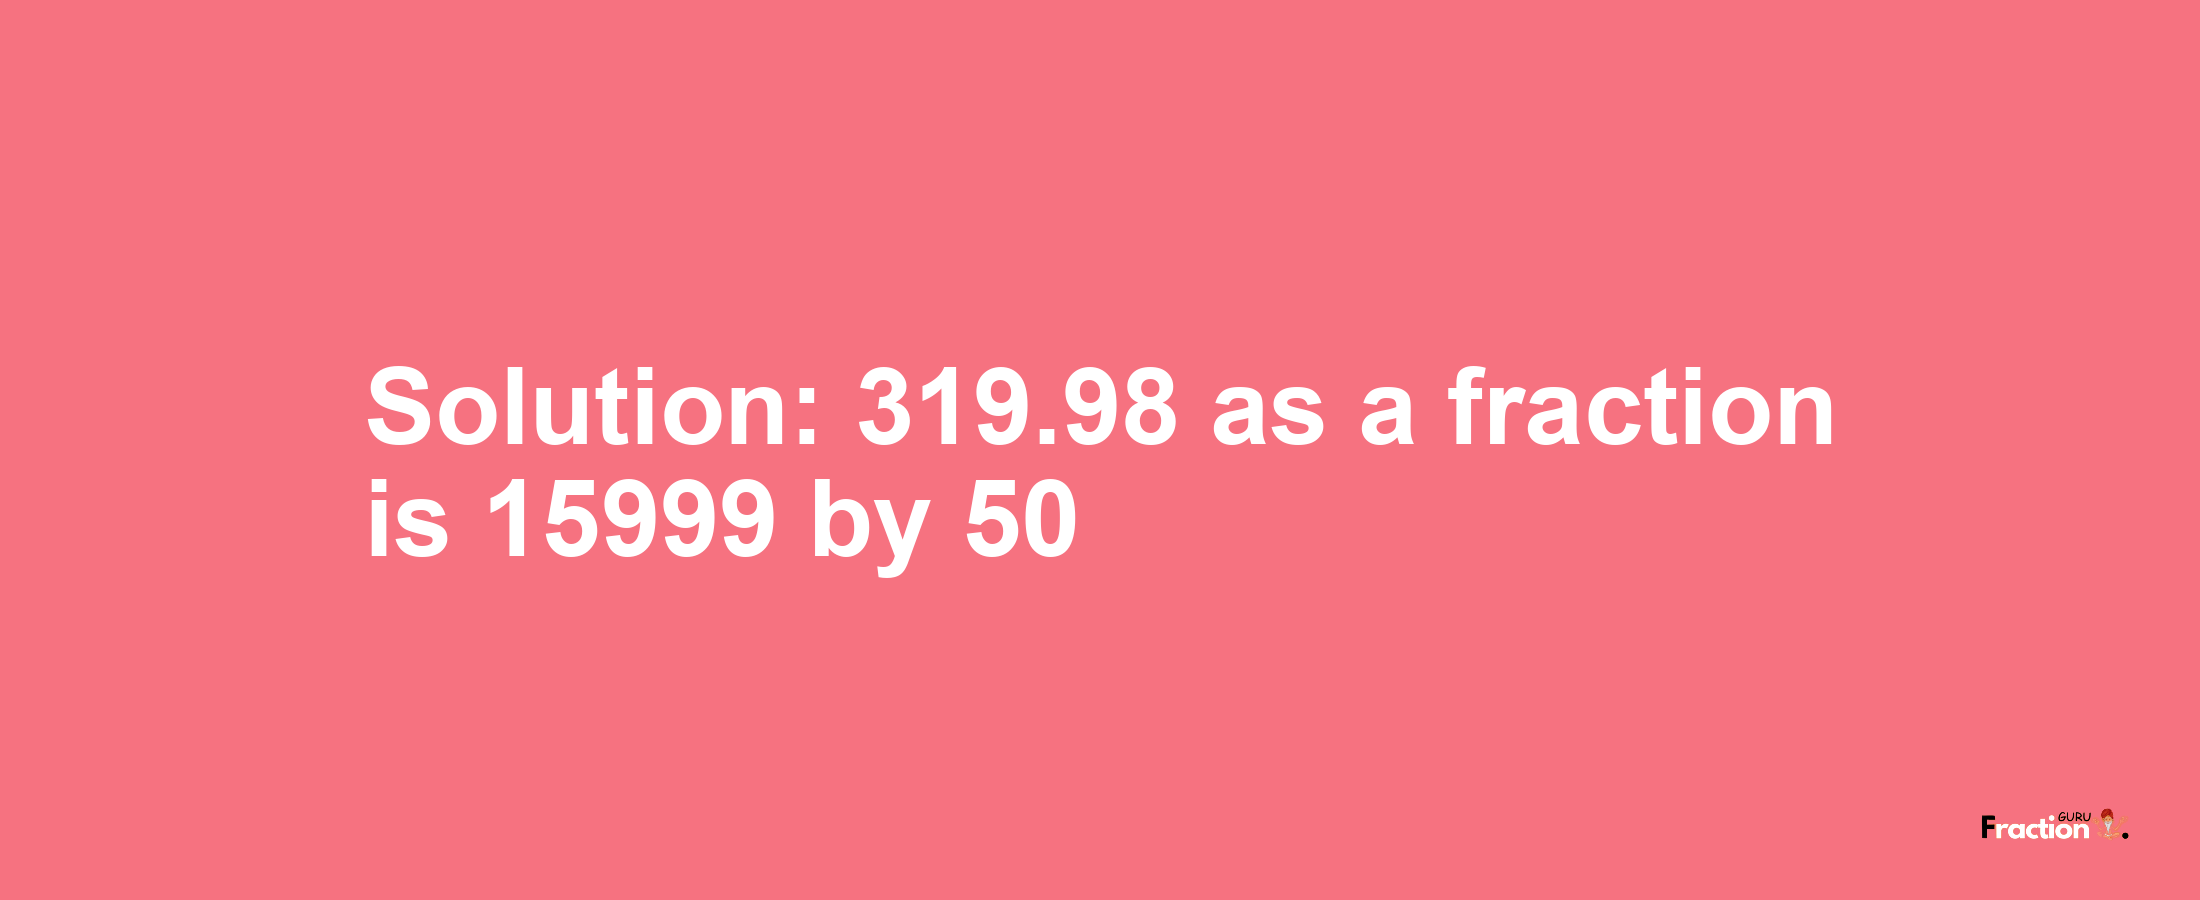 Solution:319.98 as a fraction is 15999/50